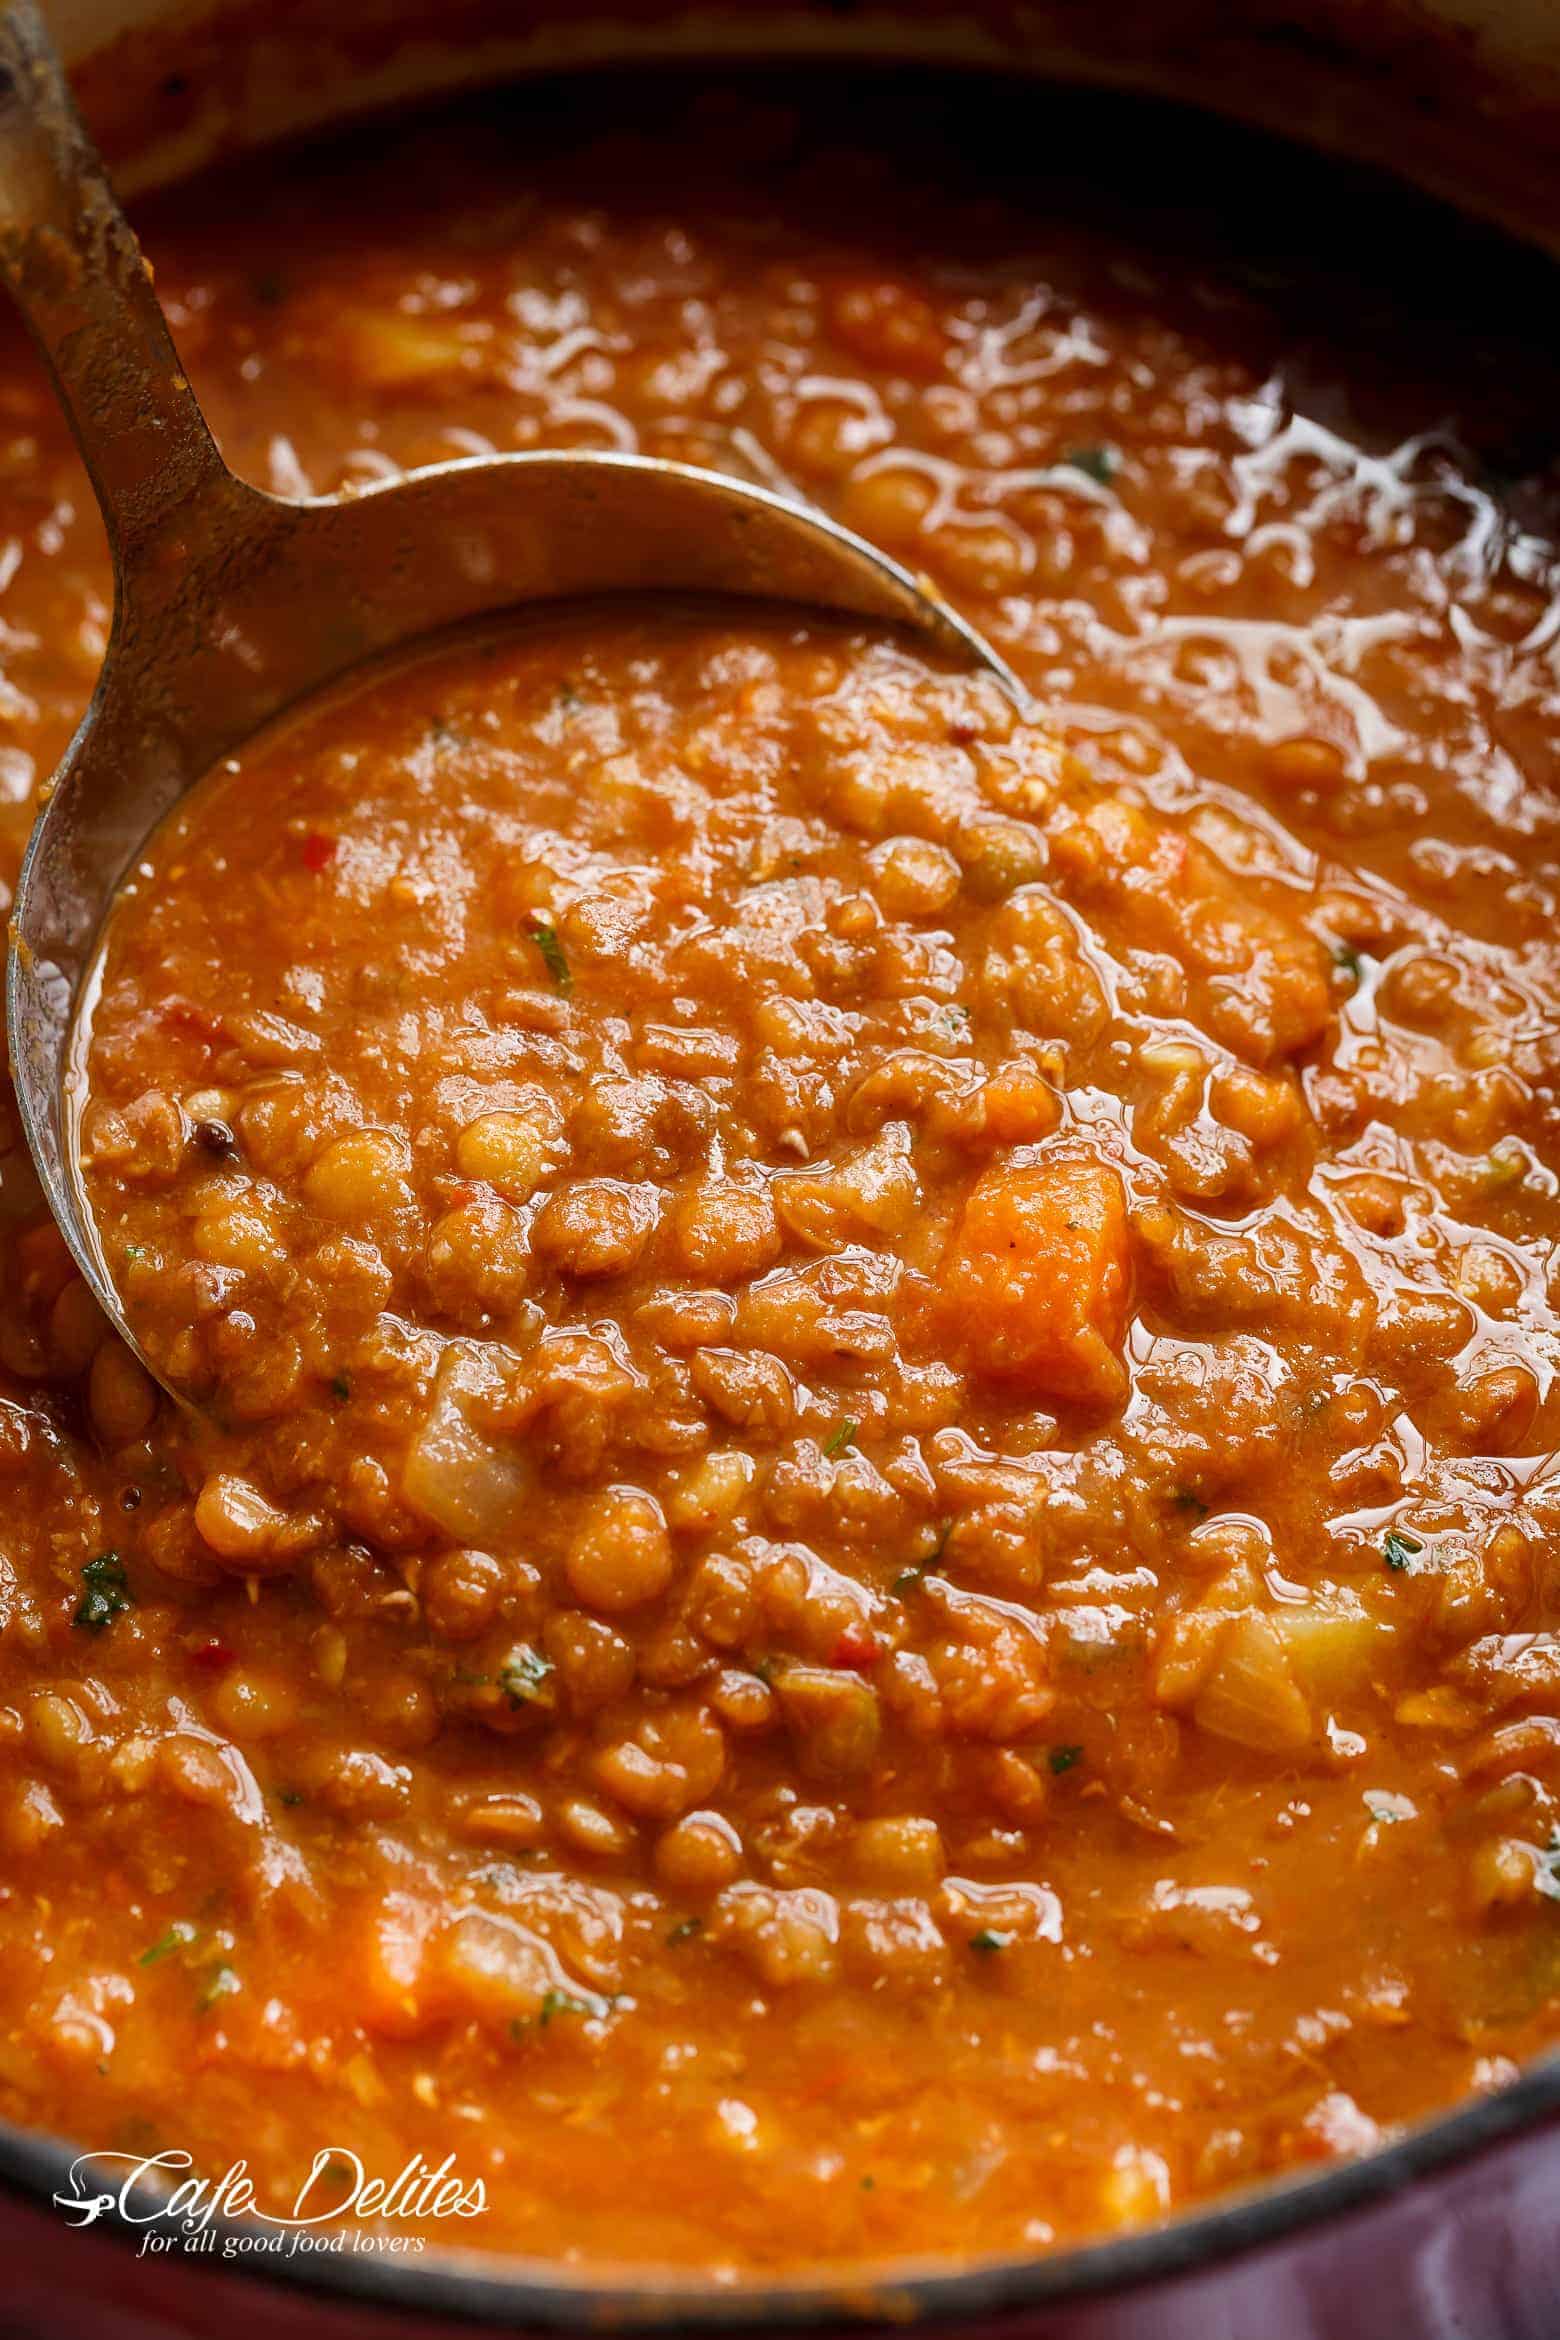 Lentil soup is simple soup to make! Just dump ingredients into a pot and let the stove do the cooking for you! | cafedelites.com